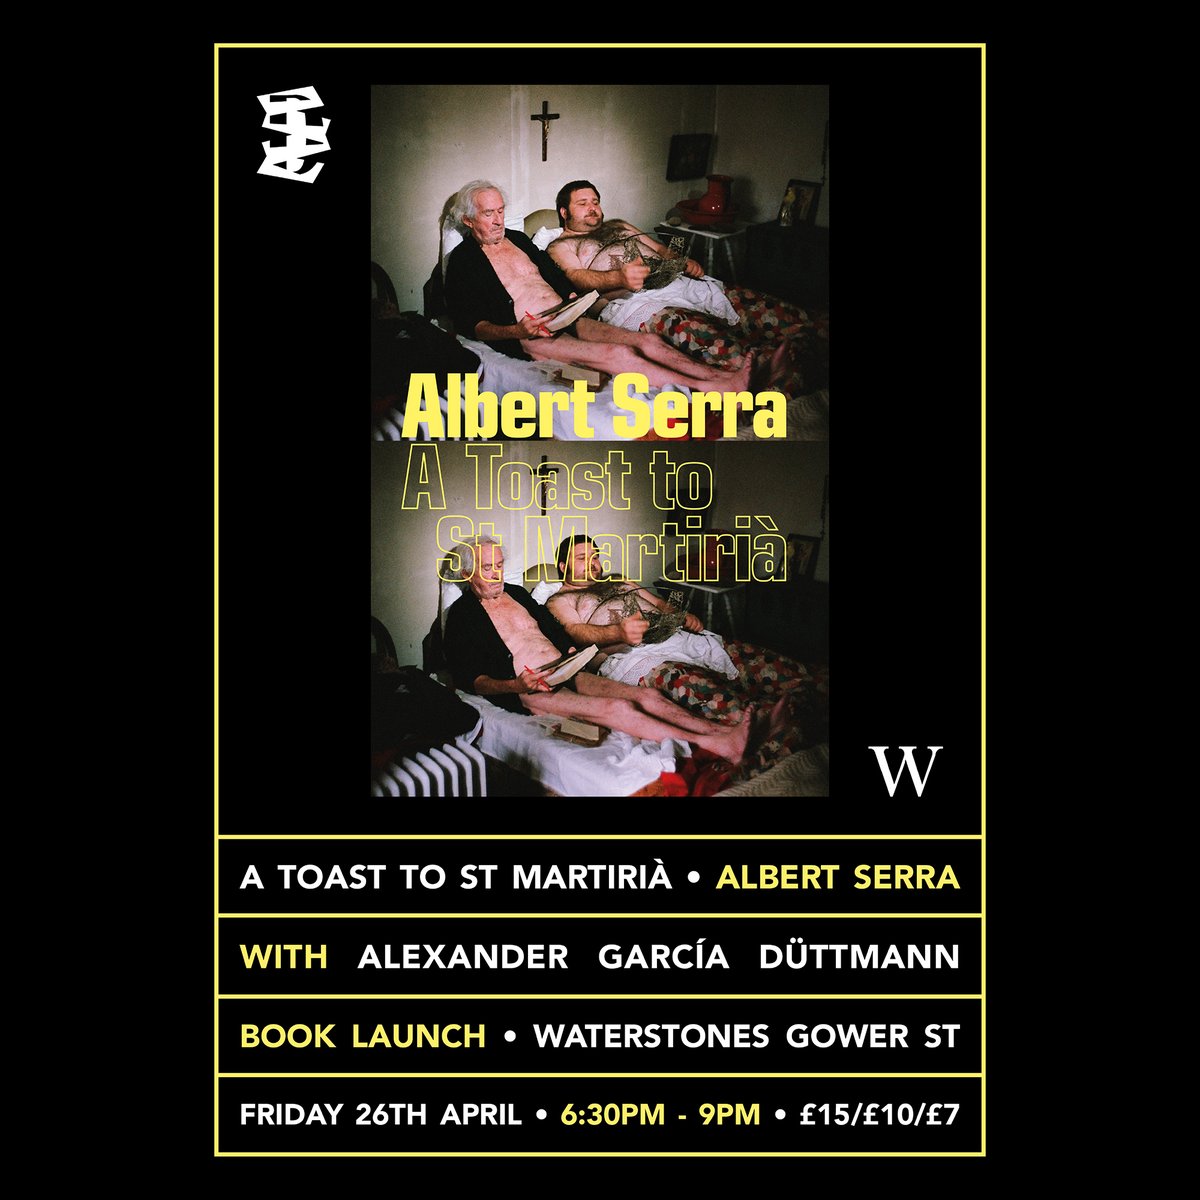 VERY excited to announce iconoclastic filmmaker Albert Serra will be in the UK to discuss his book 'A Toast to St Martirià' (from @dividedpublish) with Alexander García Düttmann. ⏰ Friday 26th April, 6:30-9pm 📍 Waterstones Gower St (@gowerst_books) 🎟️ waterstones.com/events/albert-…